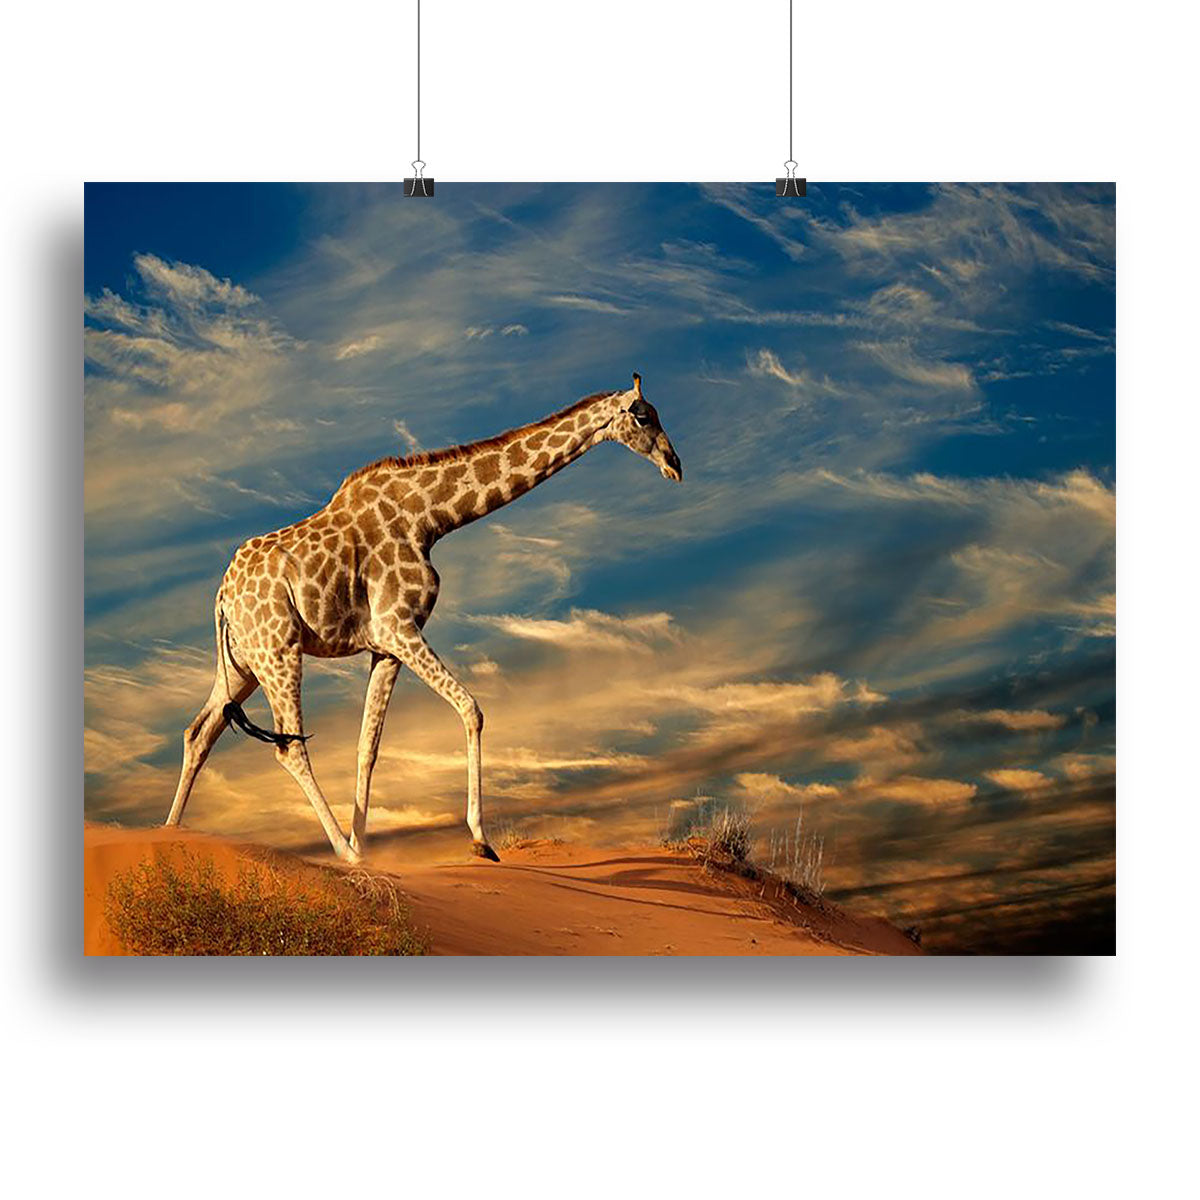 Giraffe walking on a sand dune with clouds South Africa Canvas Print or Poster - Canvas Art Rocks - 2